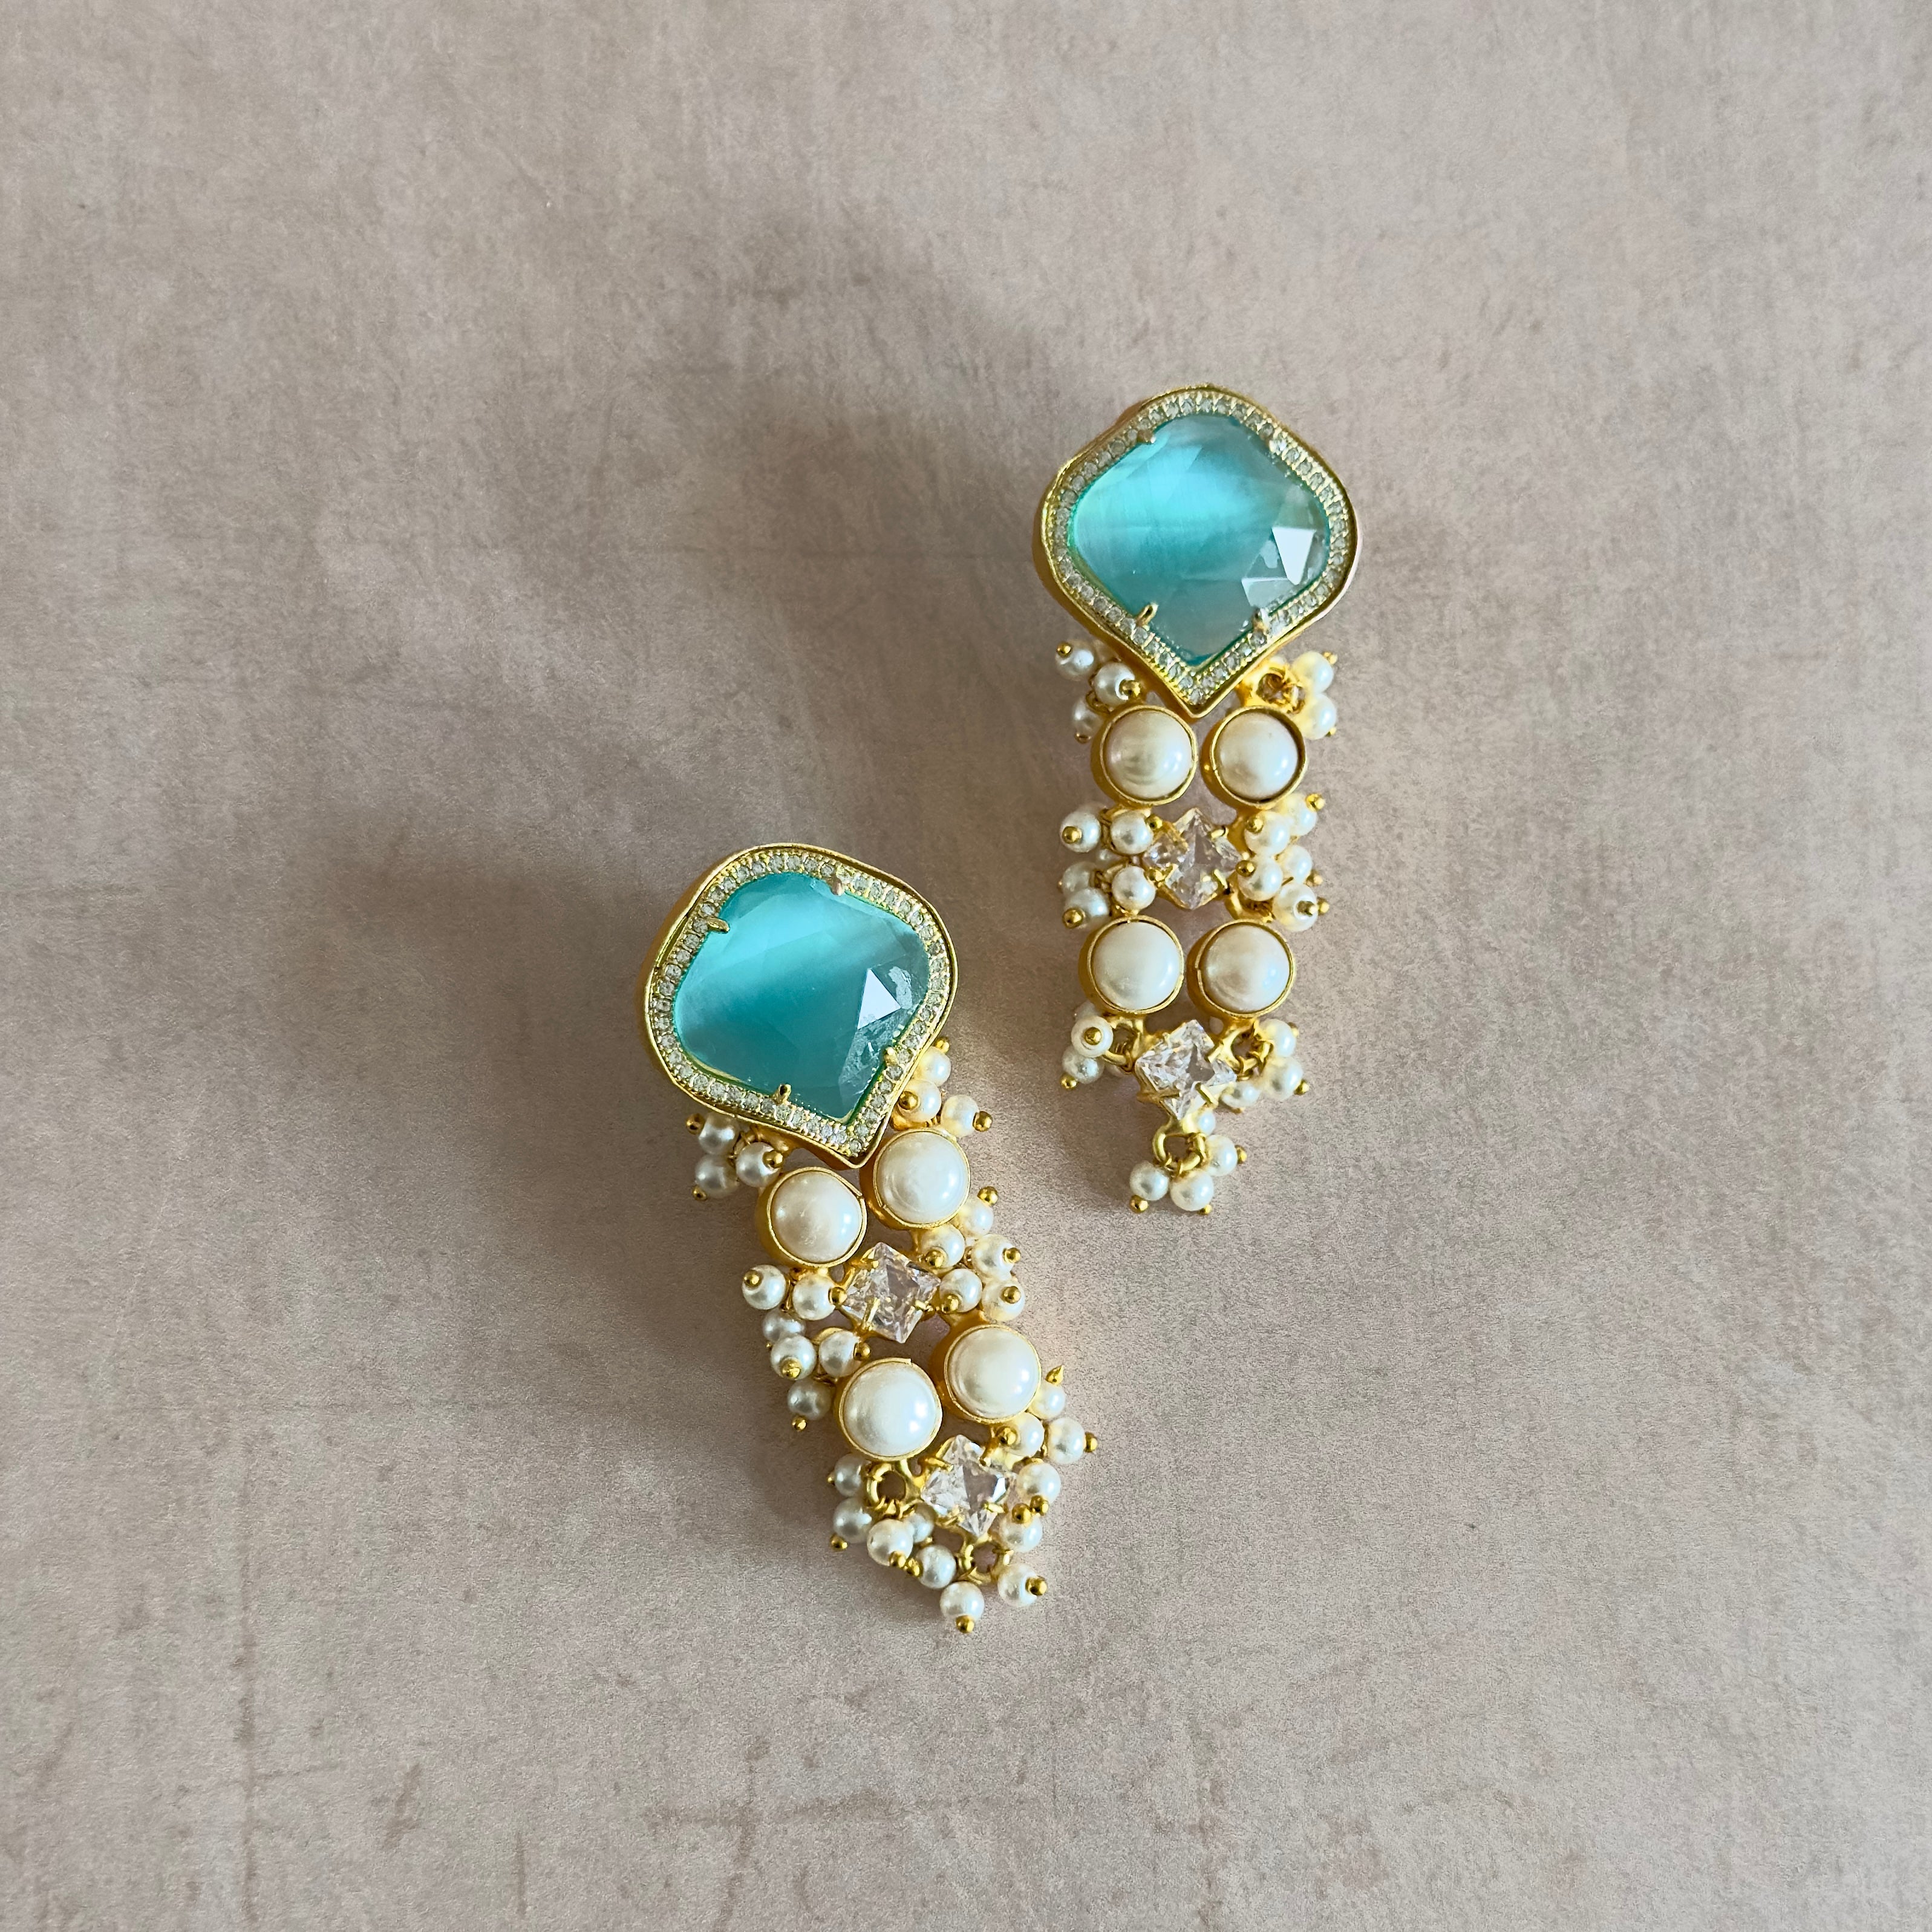 Experience the beauty and elegance of the Umaya Aqua Pearl Earrings. Adorned with vibrant aqua stones and freshwater pearls, and accented with sparkling crystals, these earrings exude a stunning design that will elevate any outfit. Bring a touch of sophistication to your style and make a statement with these exquisite earrings.